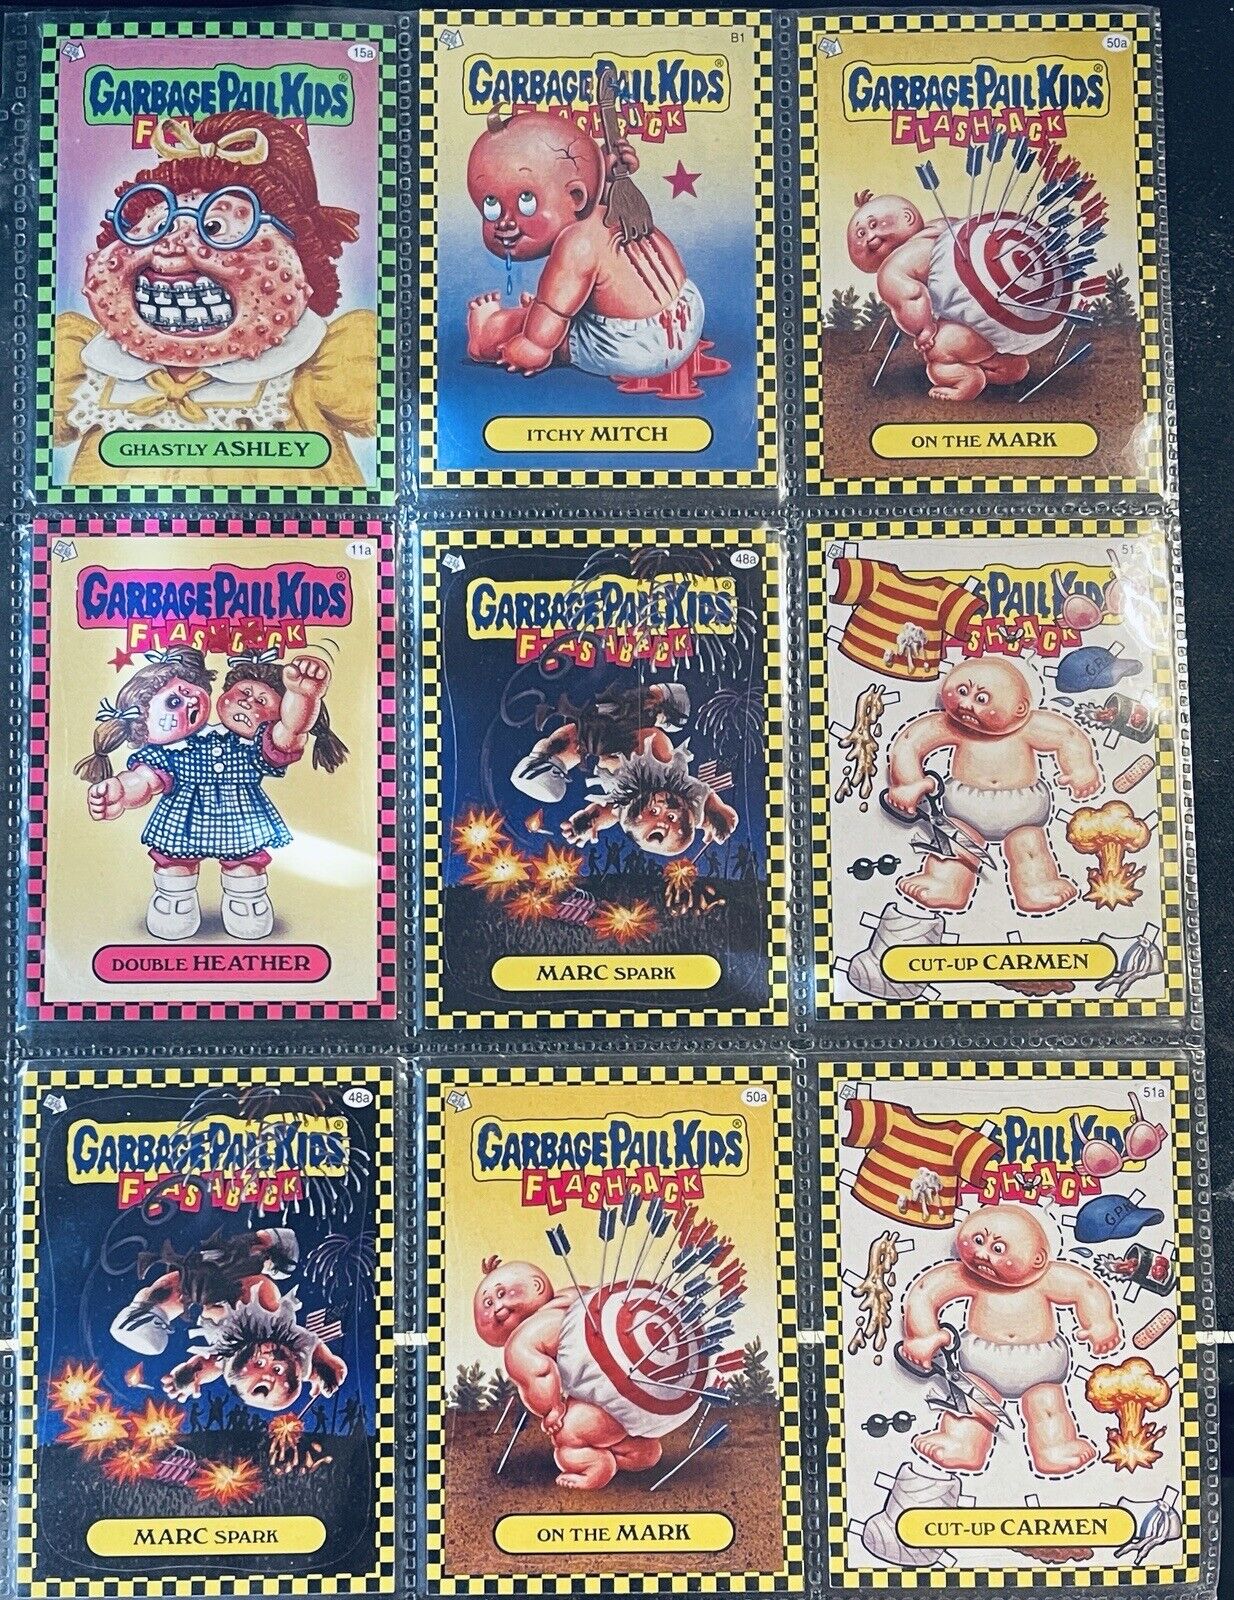 2010 Flashback Garbage Pail Kids 1 lot of 9 Cards Excellent Condition